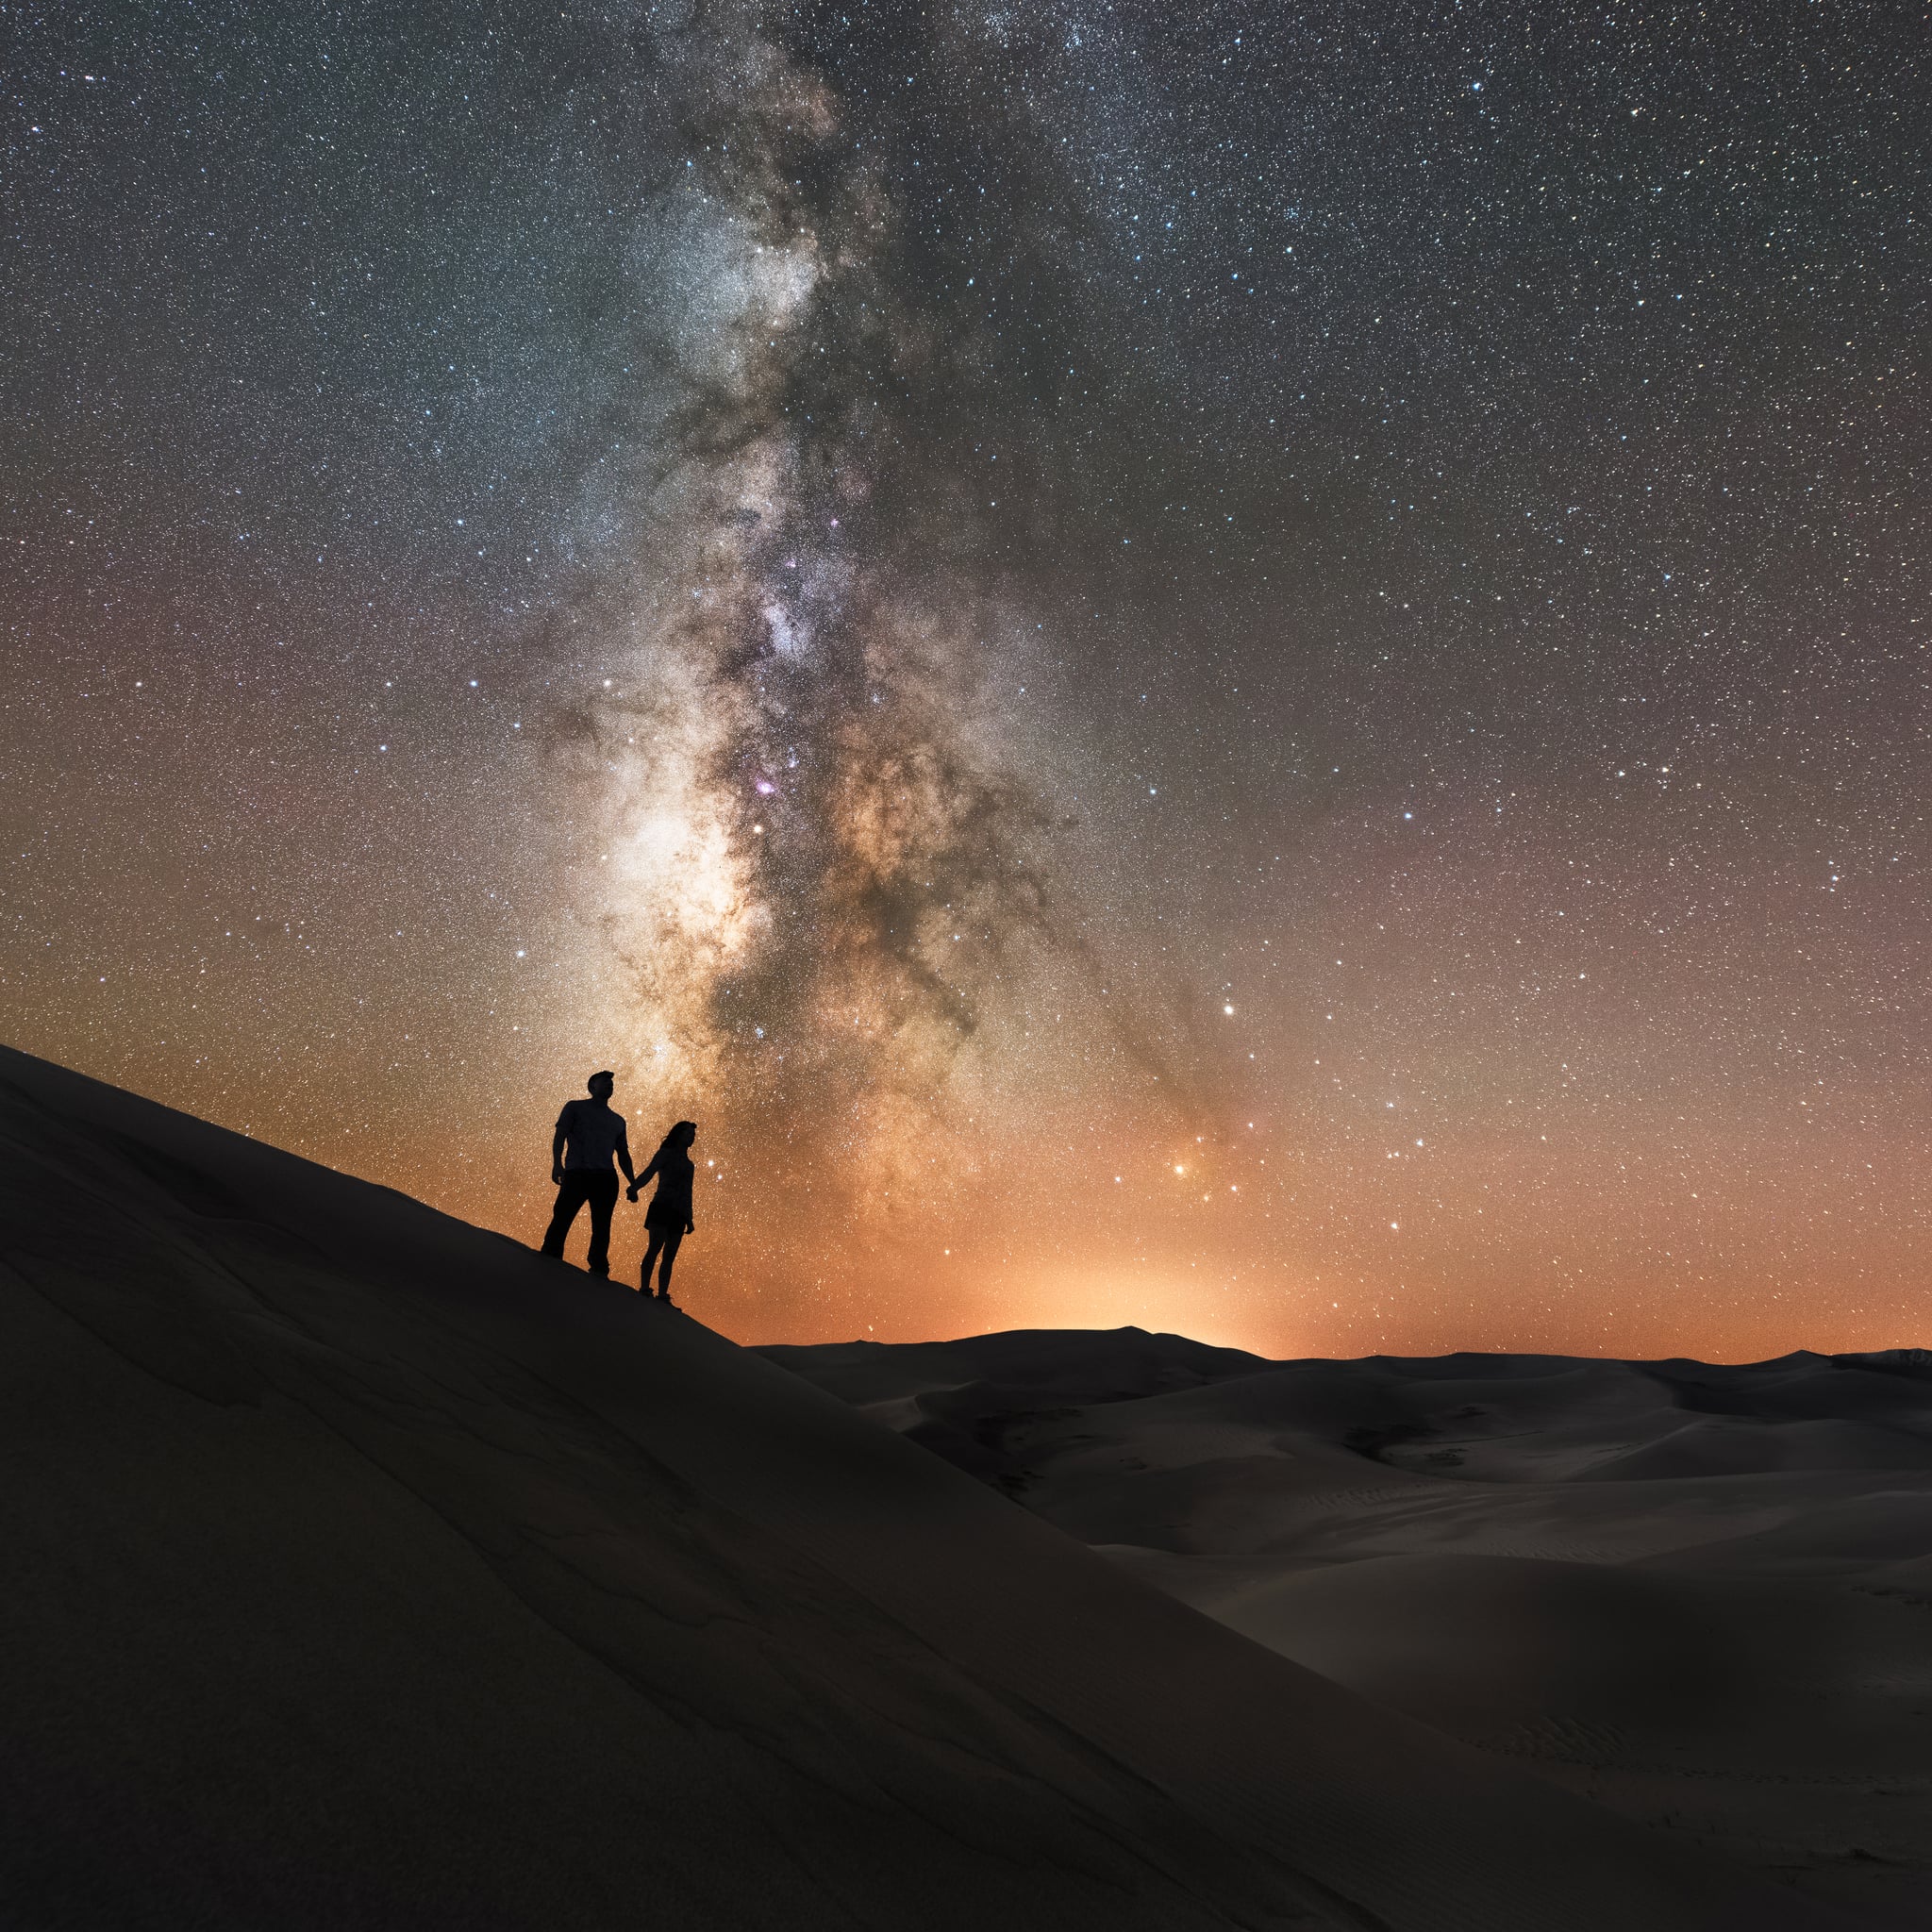 Hikers reach the peak of a sand dune and hold hands under the night sky.